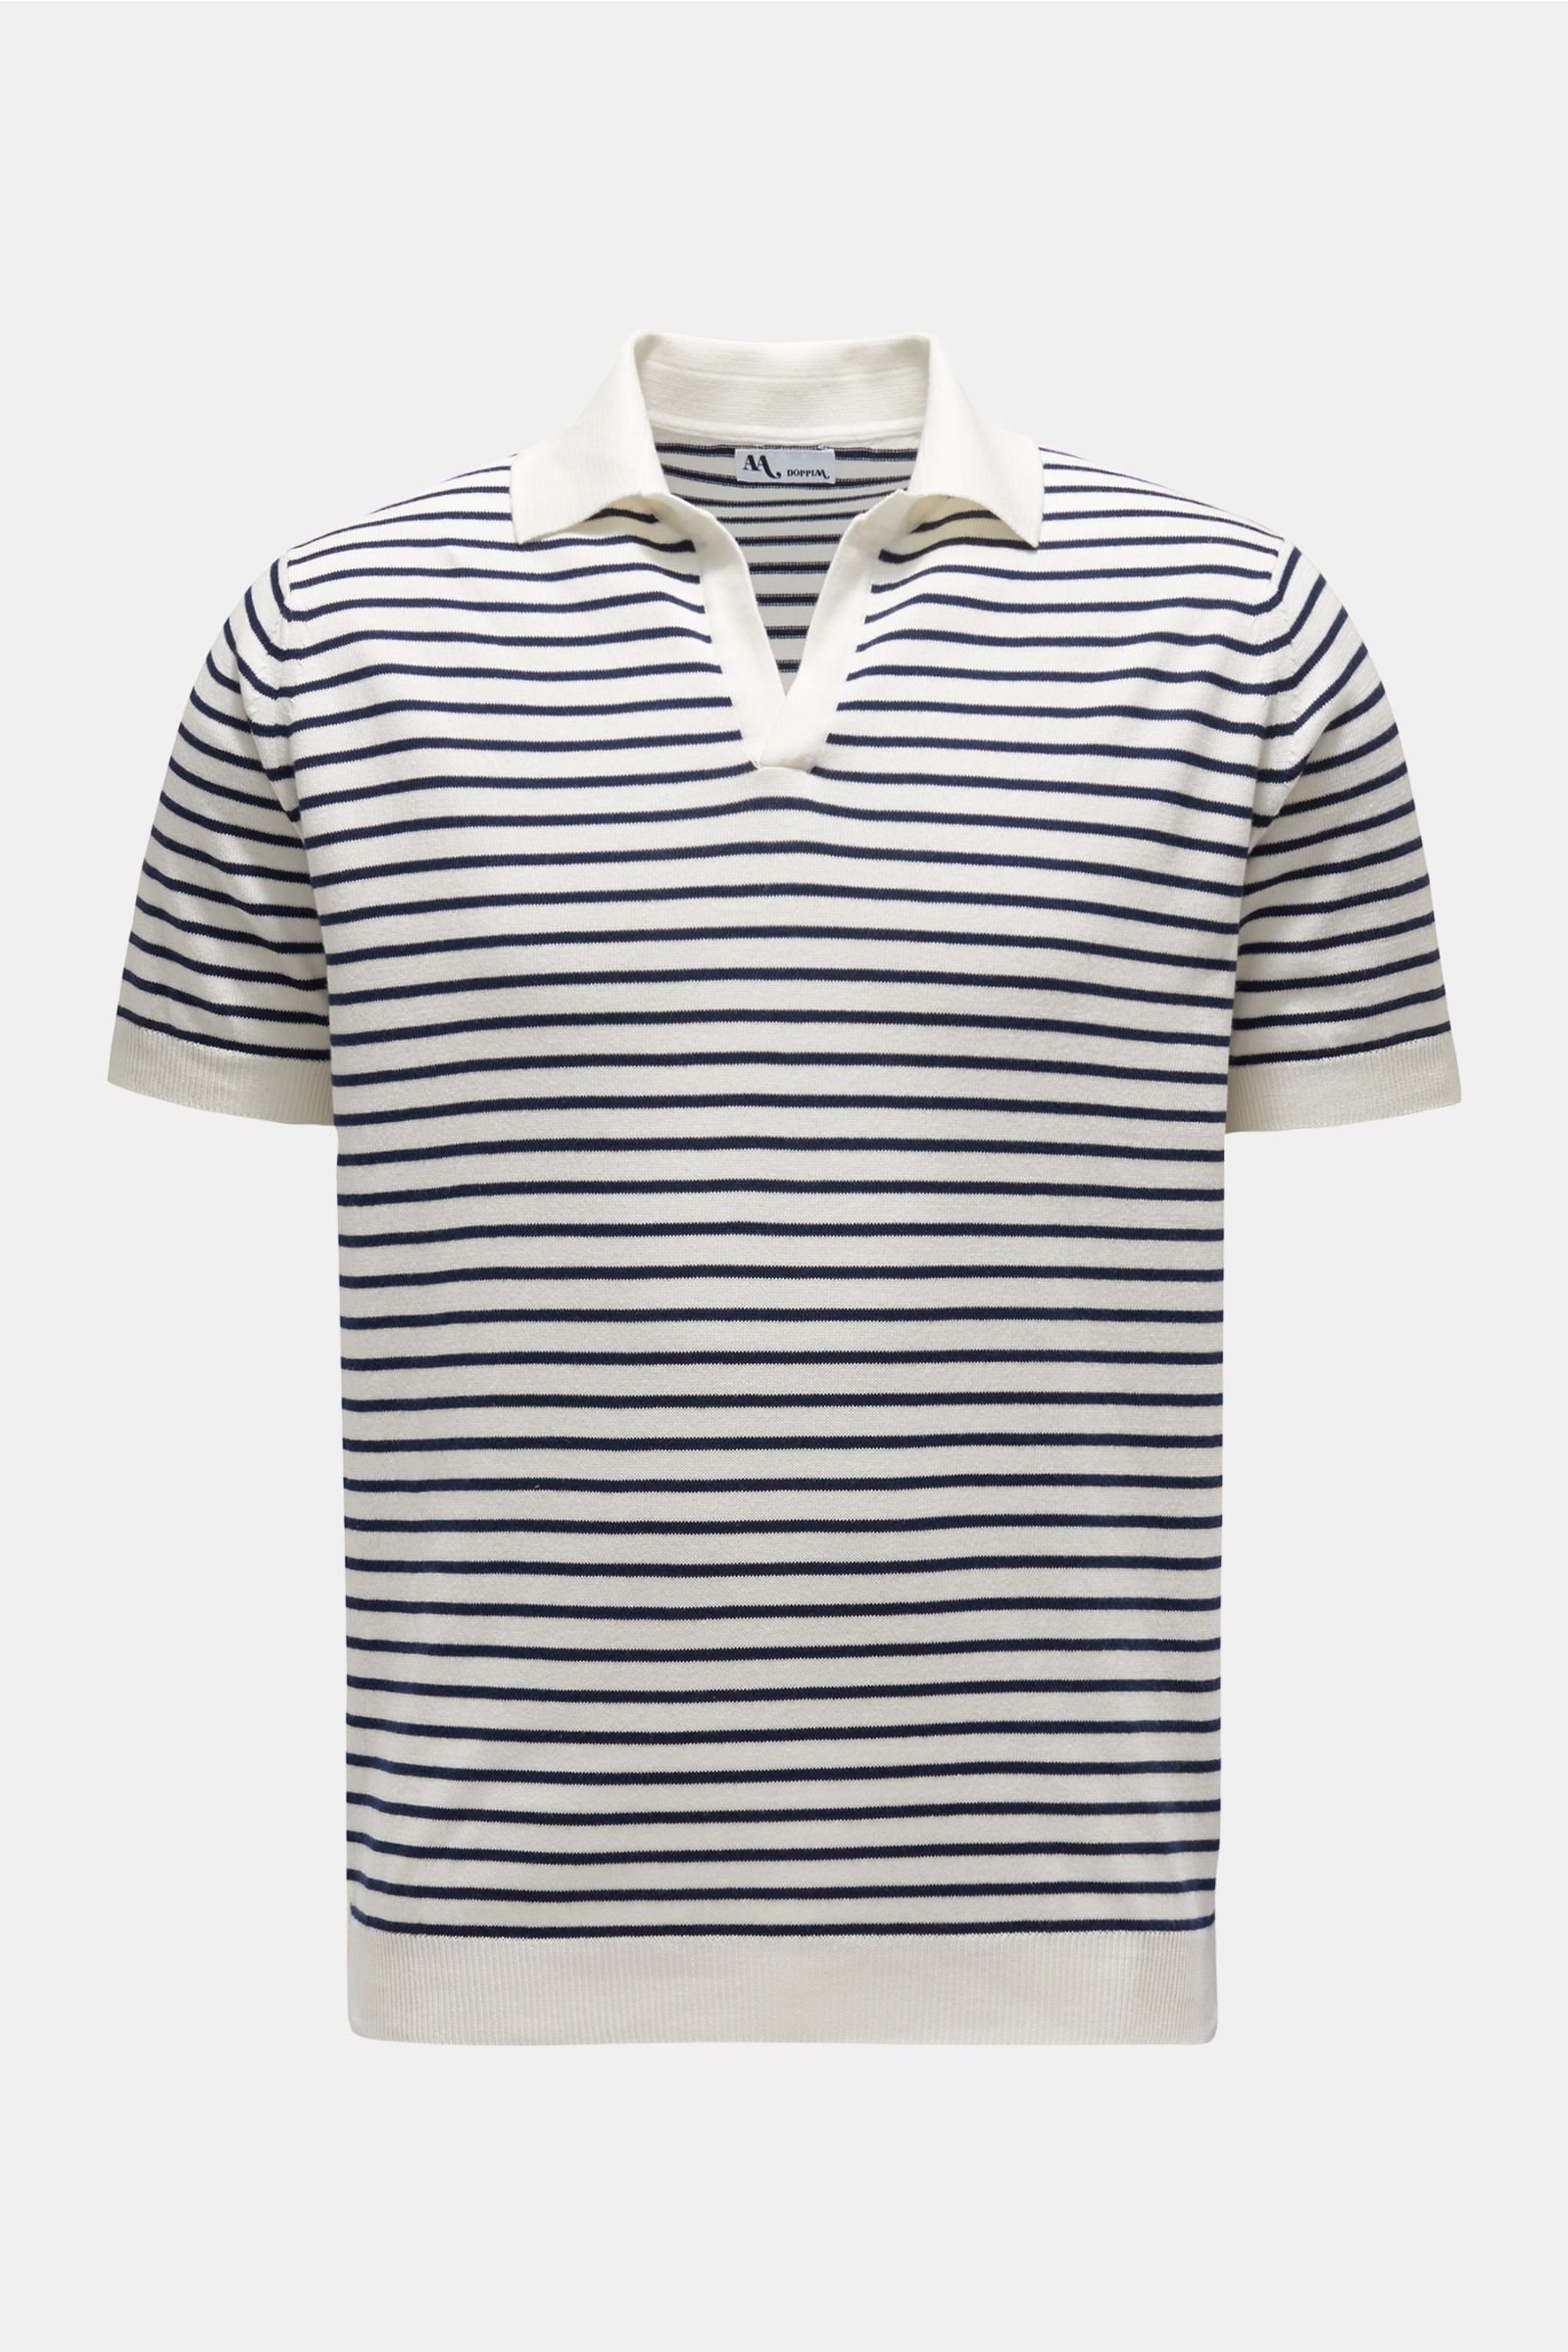 Short sleeve knit polo 'Aavio' navy/off-white striped